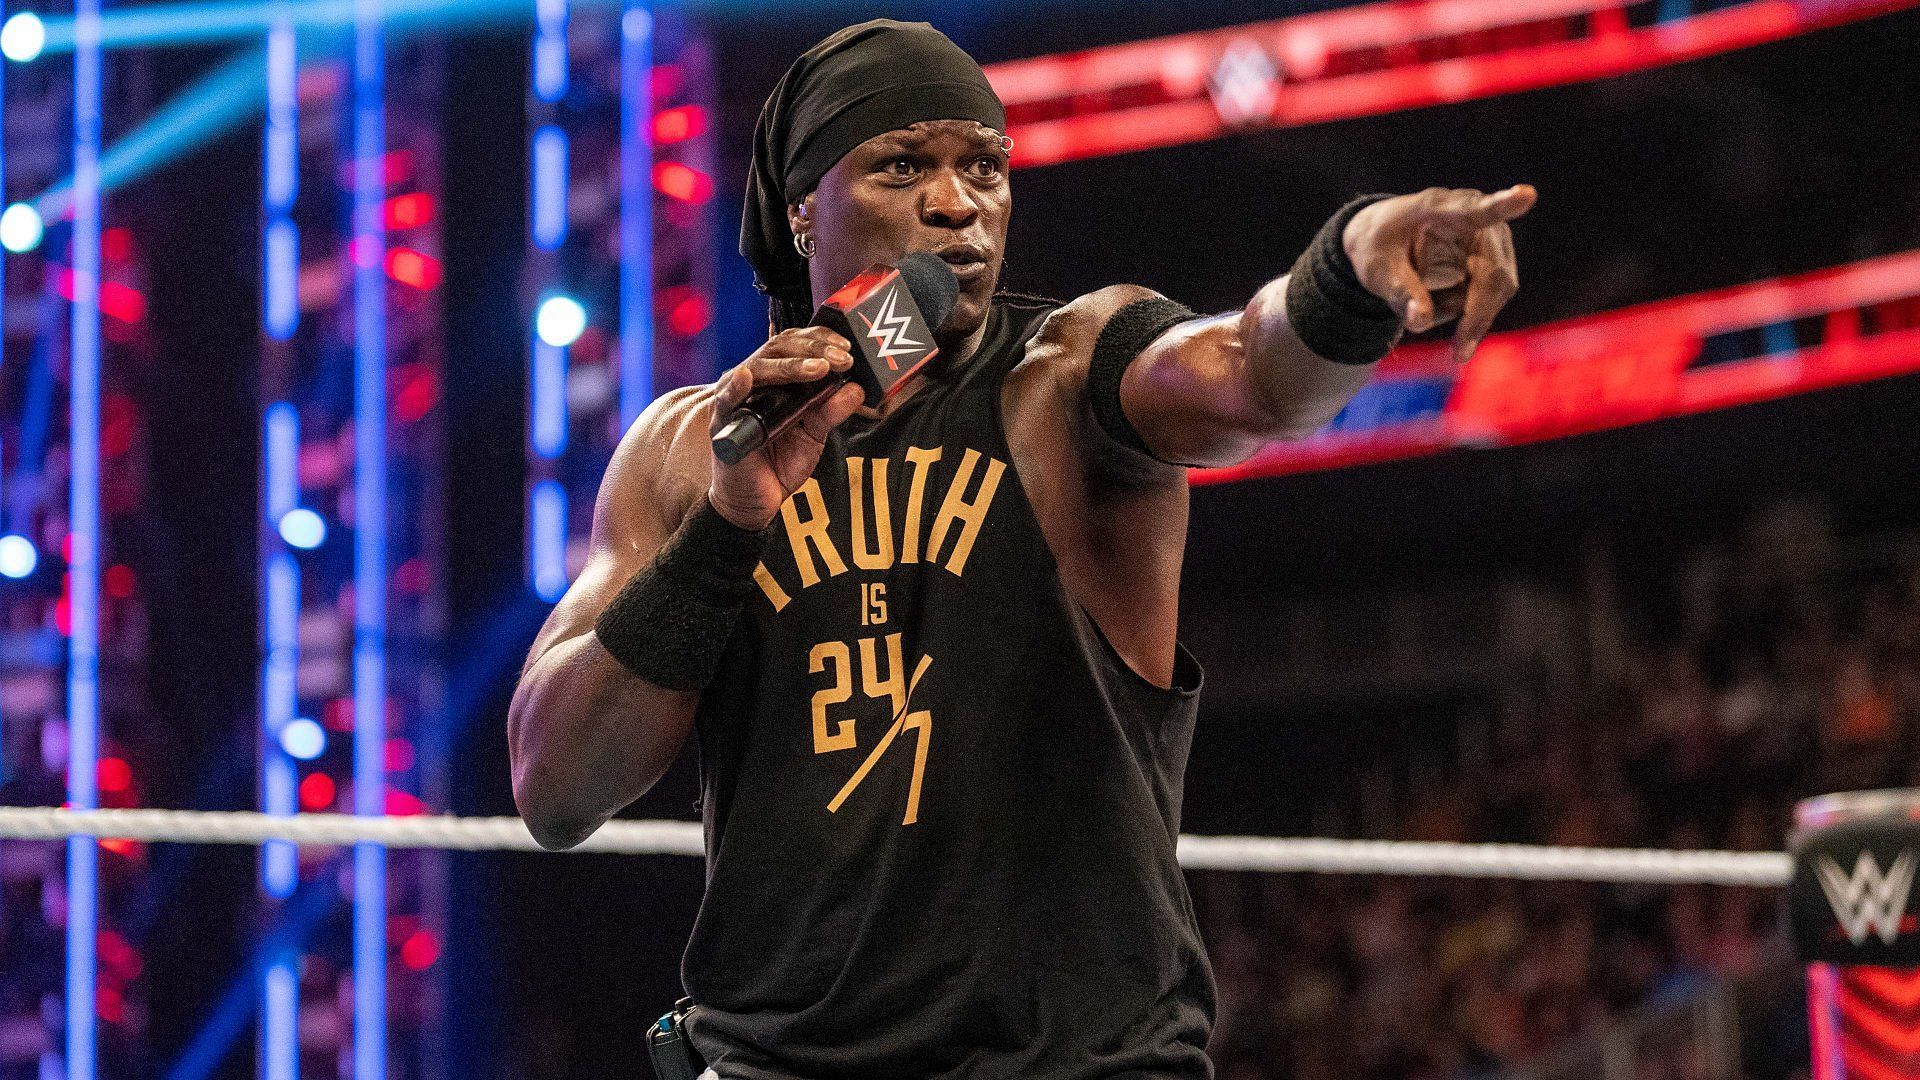 R-Truth on Main Event